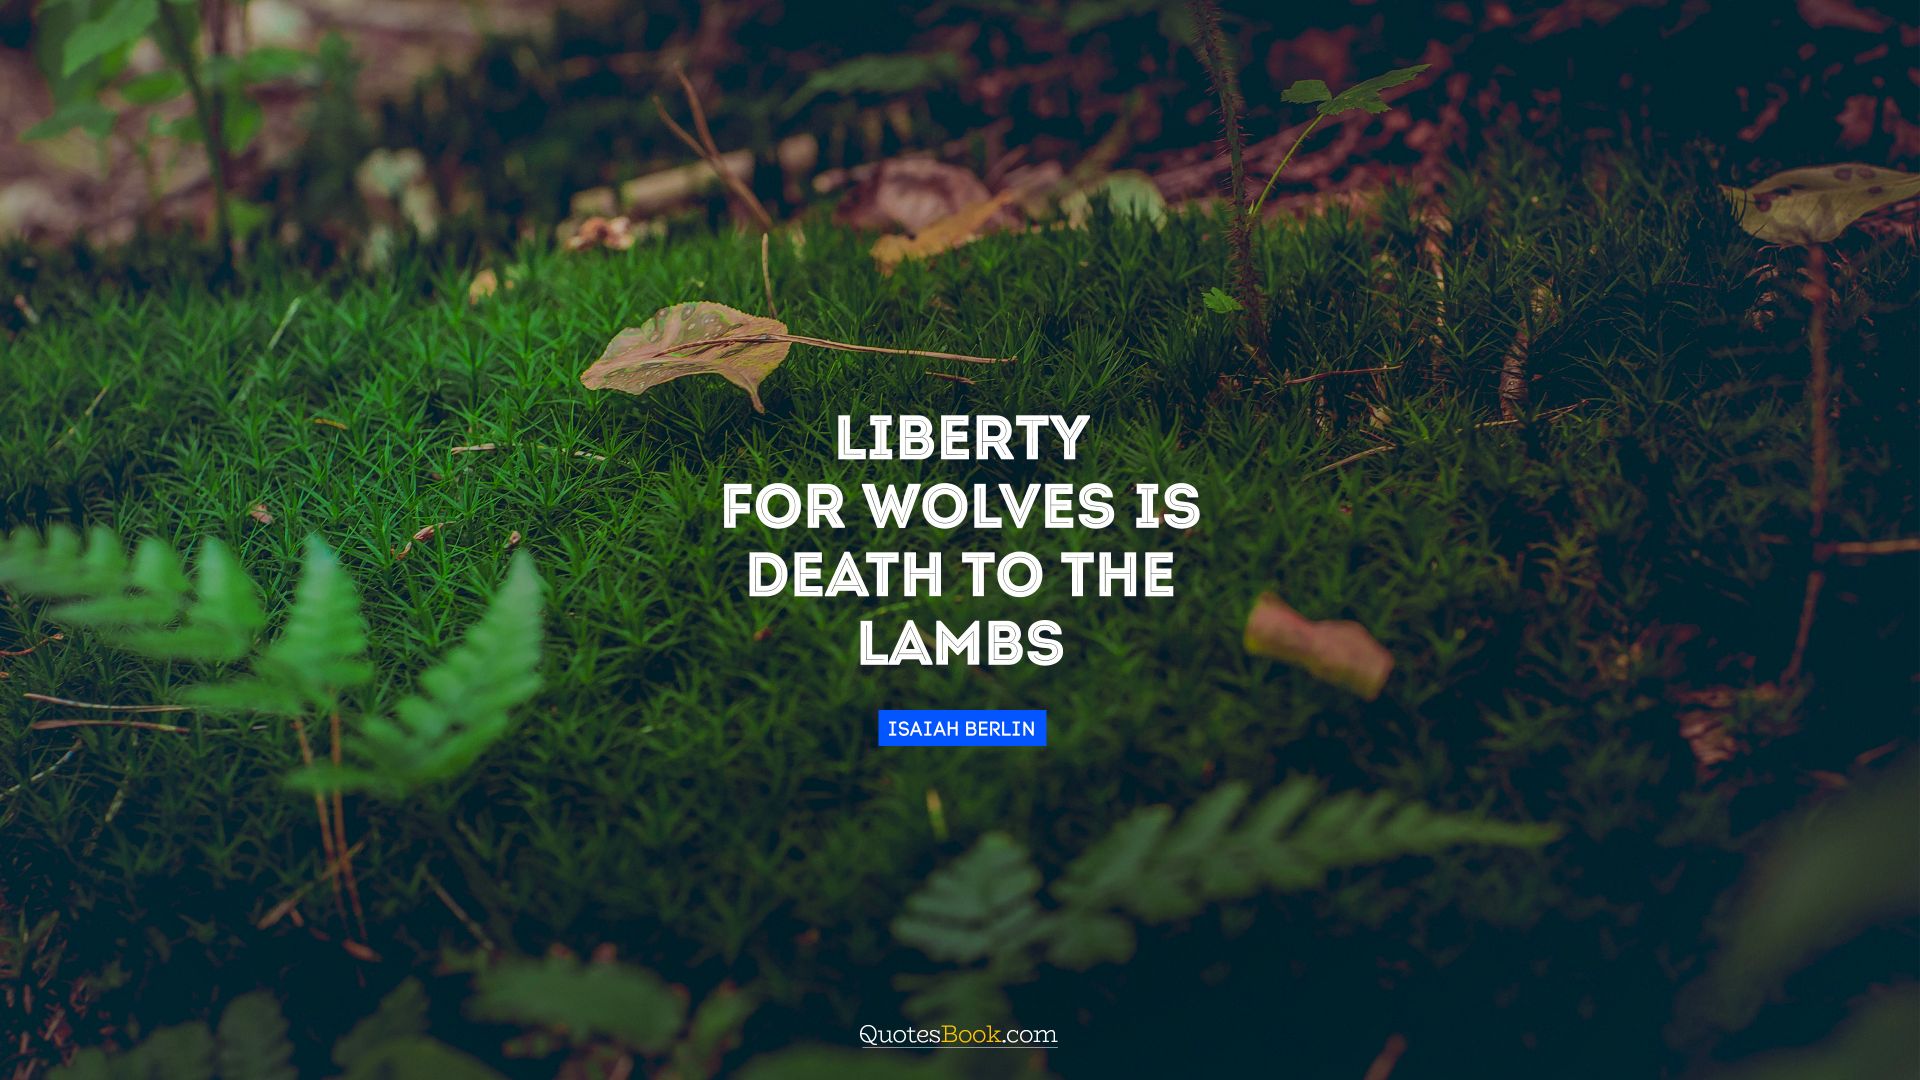 Liberty for wolves is death to the lambs. - Quote by Isaiah Berlin